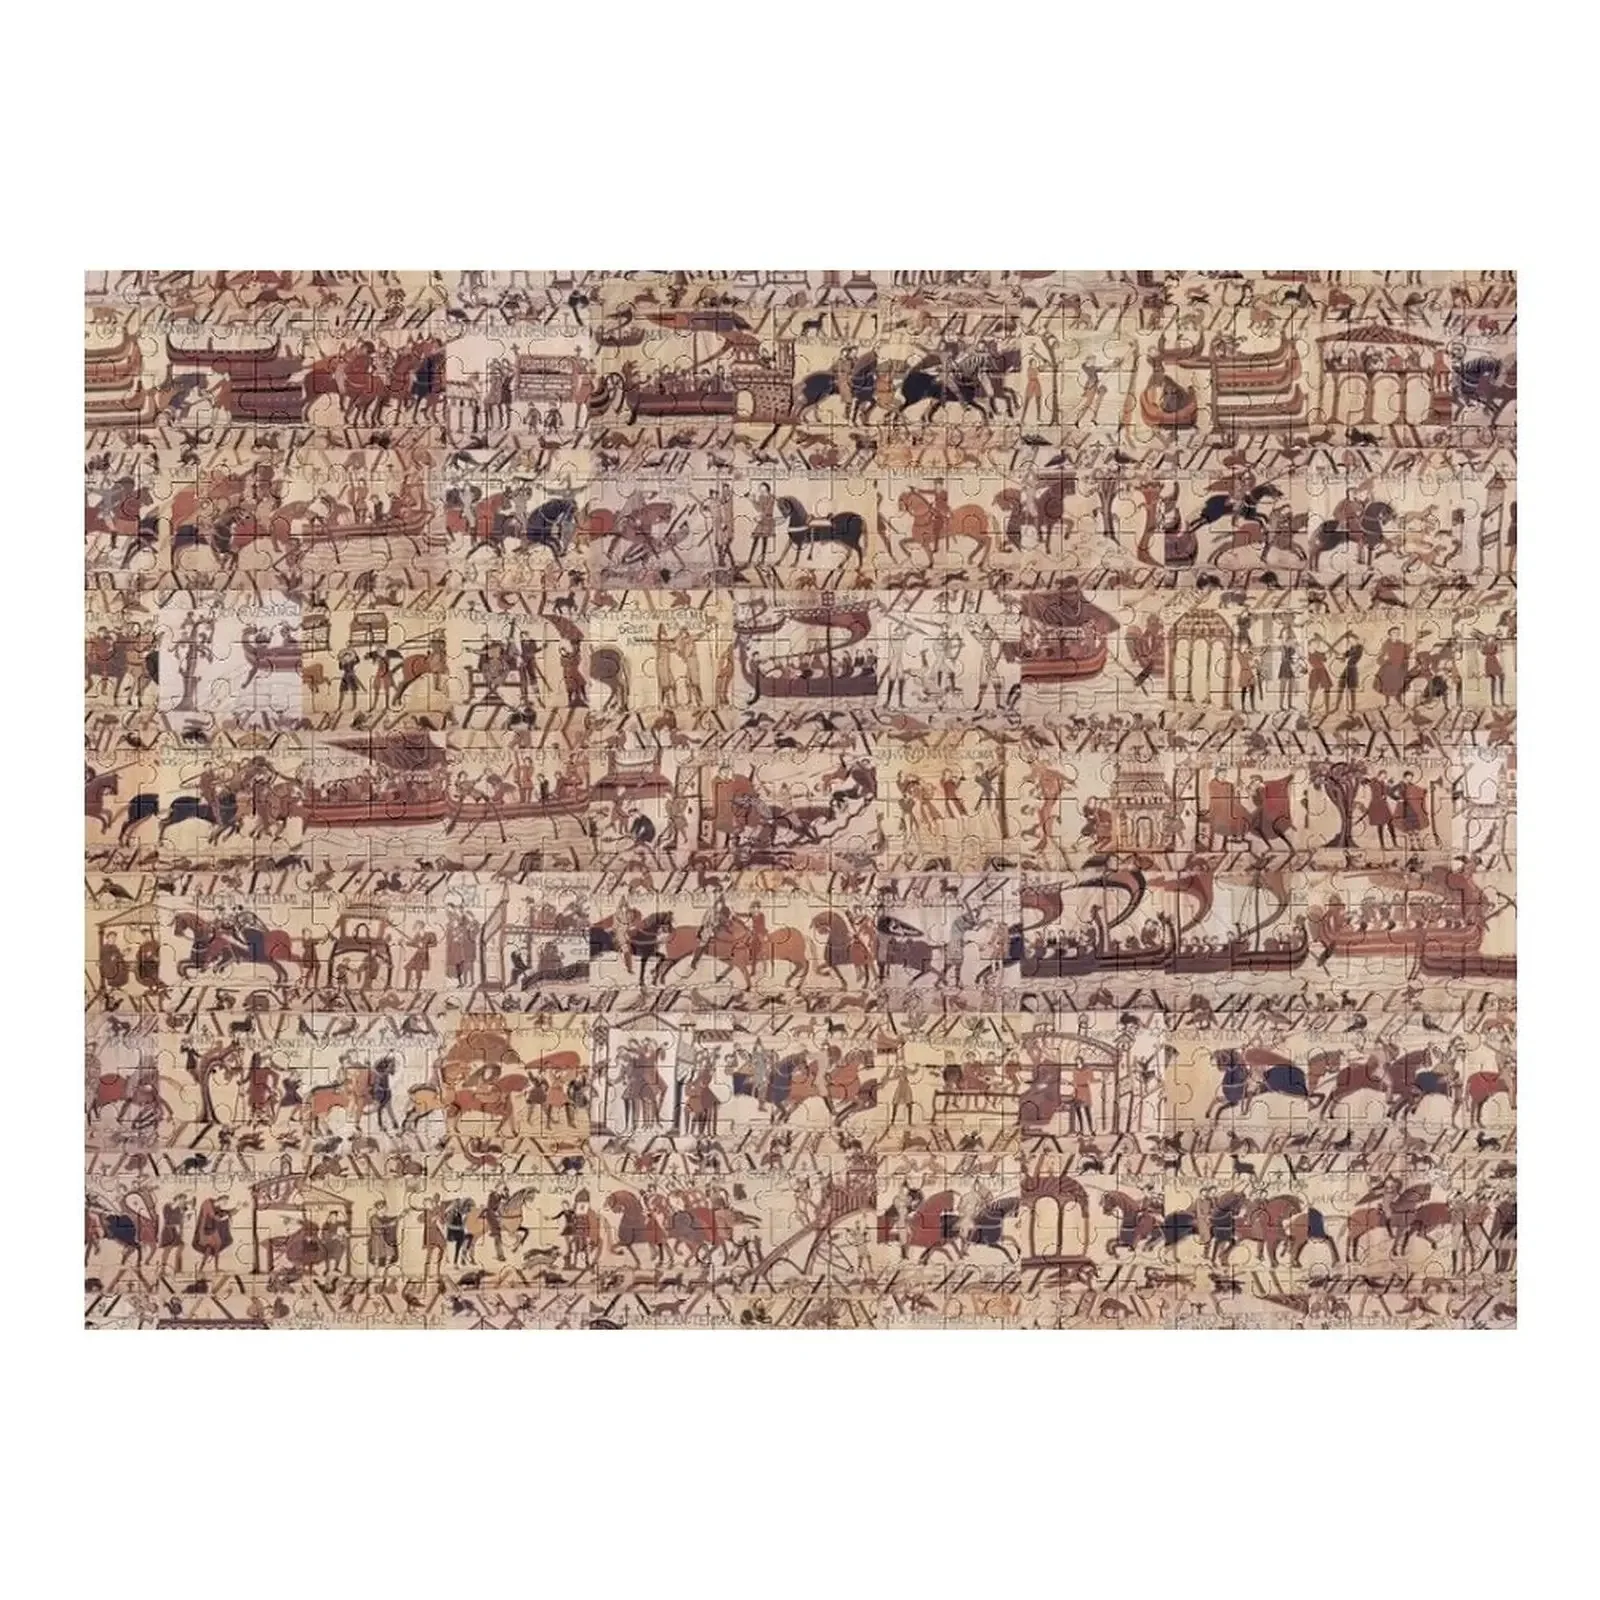 Bayeux Tapestry Jigsaw Puzzle Custom Name Wooden Toy Works Of Art Puzzle greetings from cyprus vintage style retro souvenir jigsaw puzzle picture works of art personalised custom photo puzzle